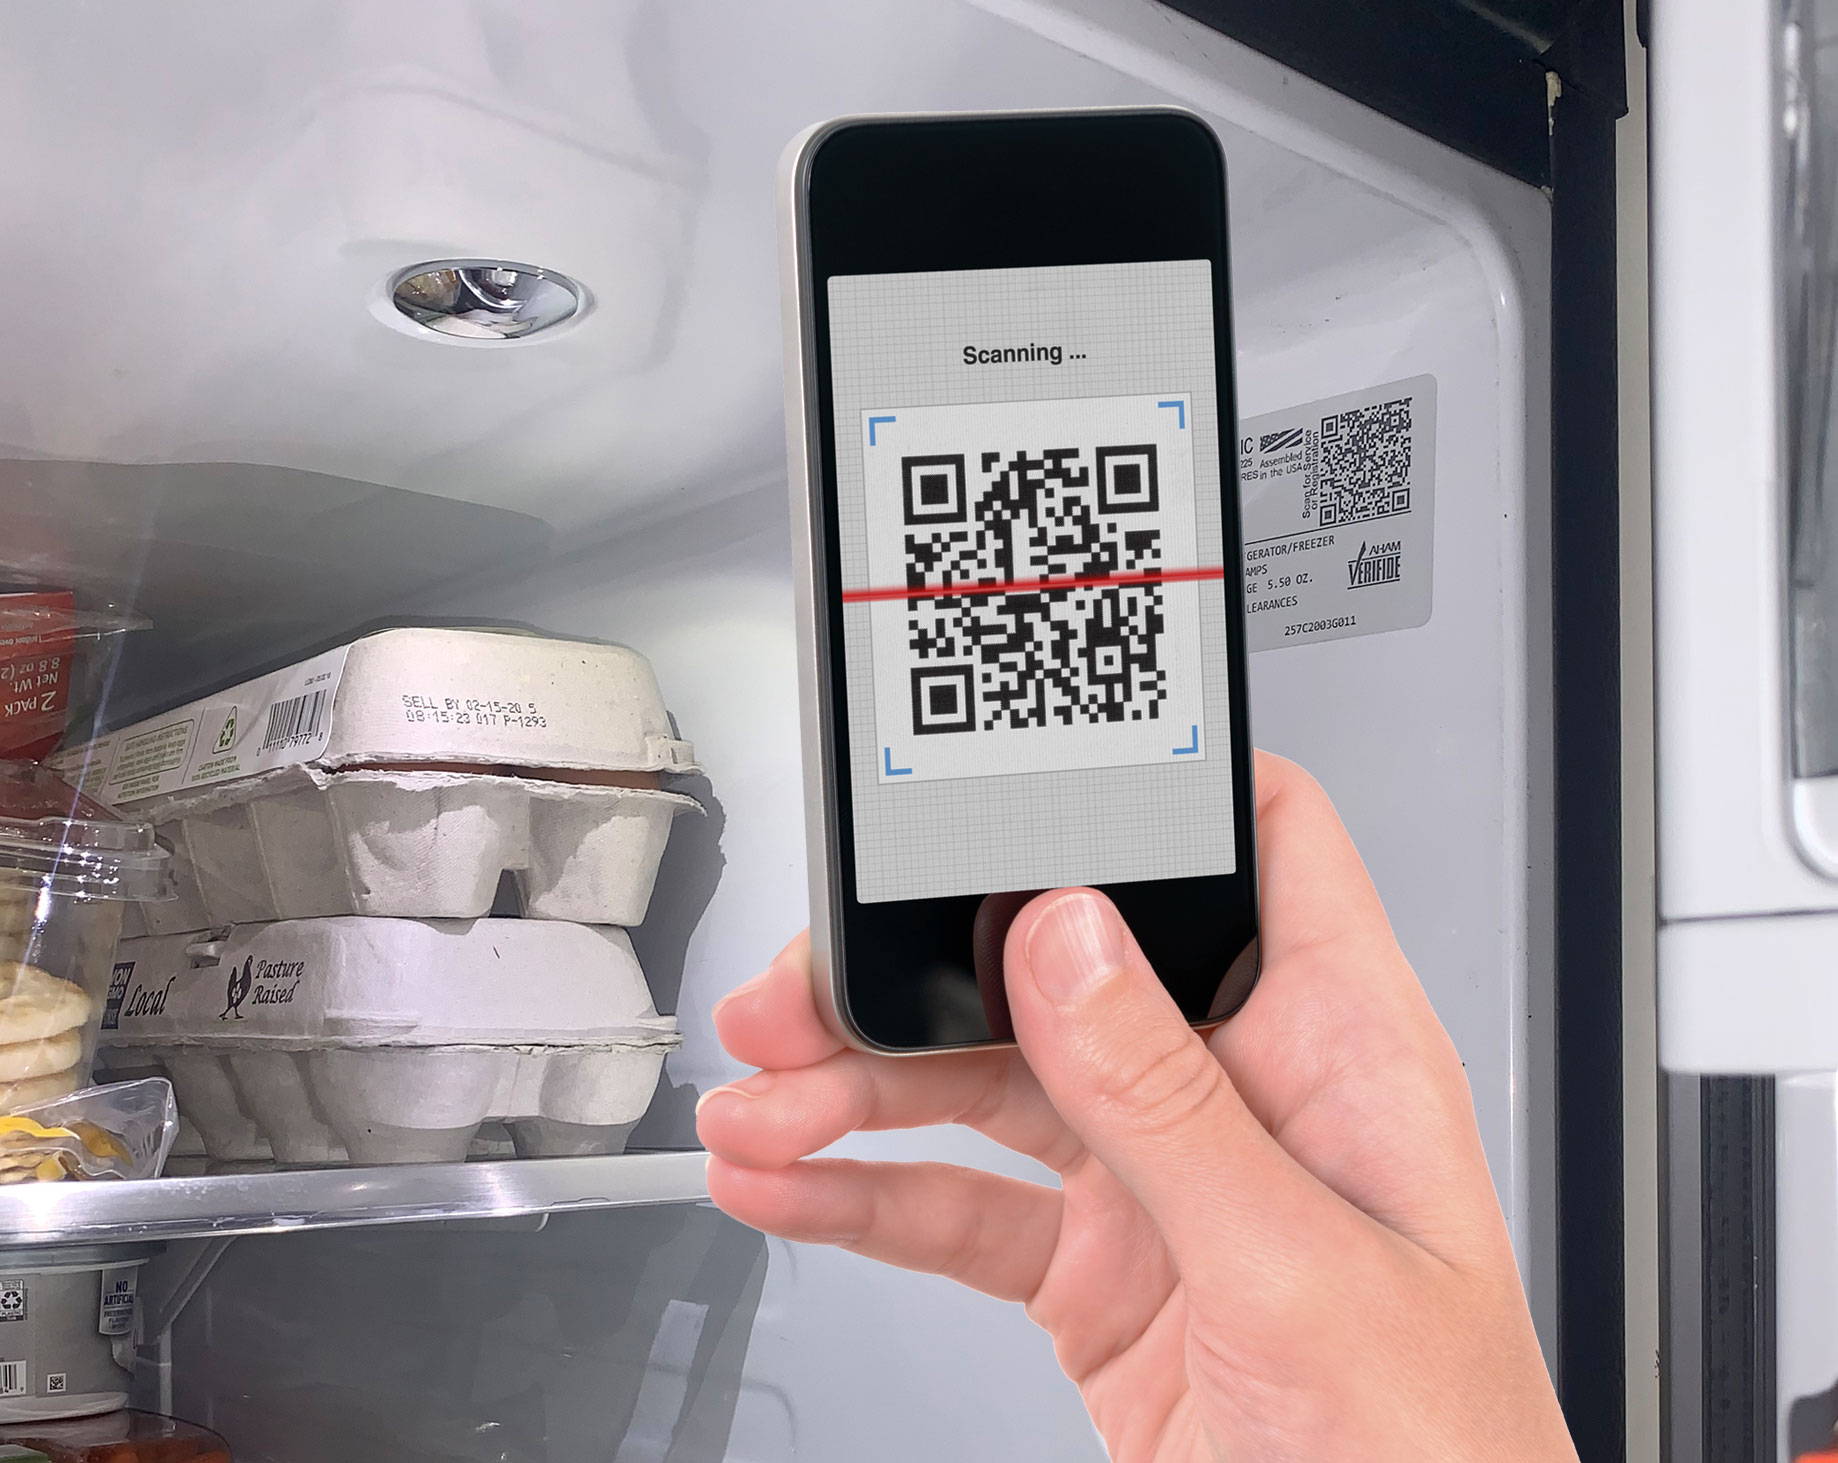 GE Refrigerator with QR code for troubleshooting and support